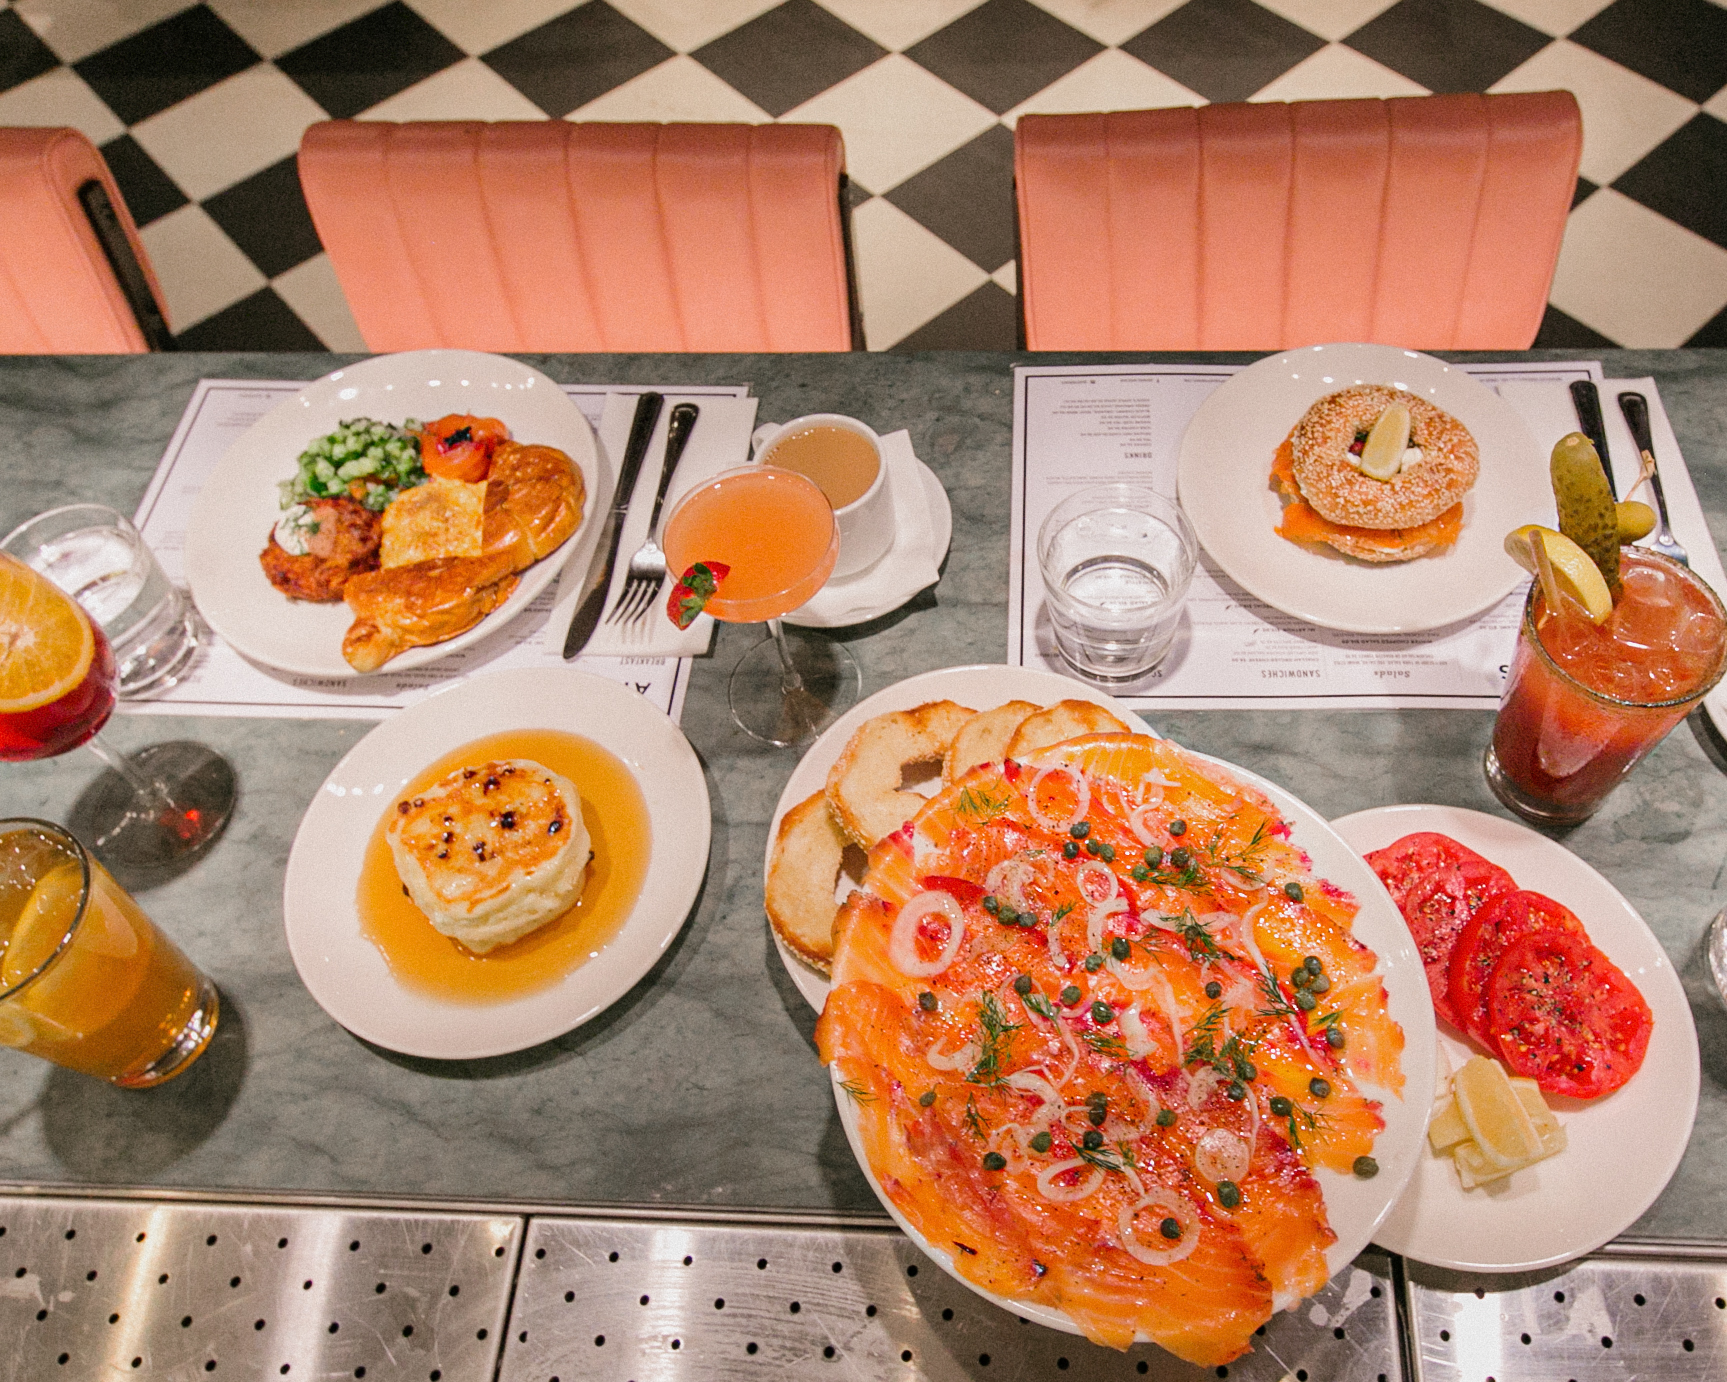 a table covered in plates with food: smoked salmon, pancakes, drinks, etc.